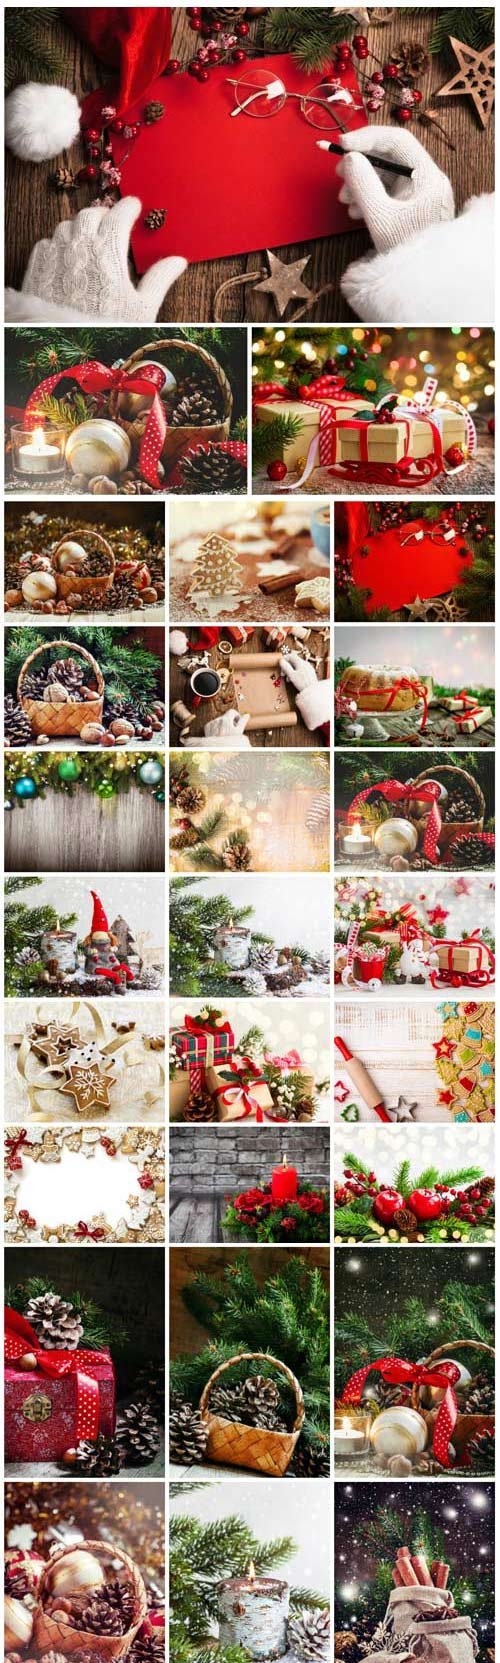 New Year and Christmas stock photos - 27